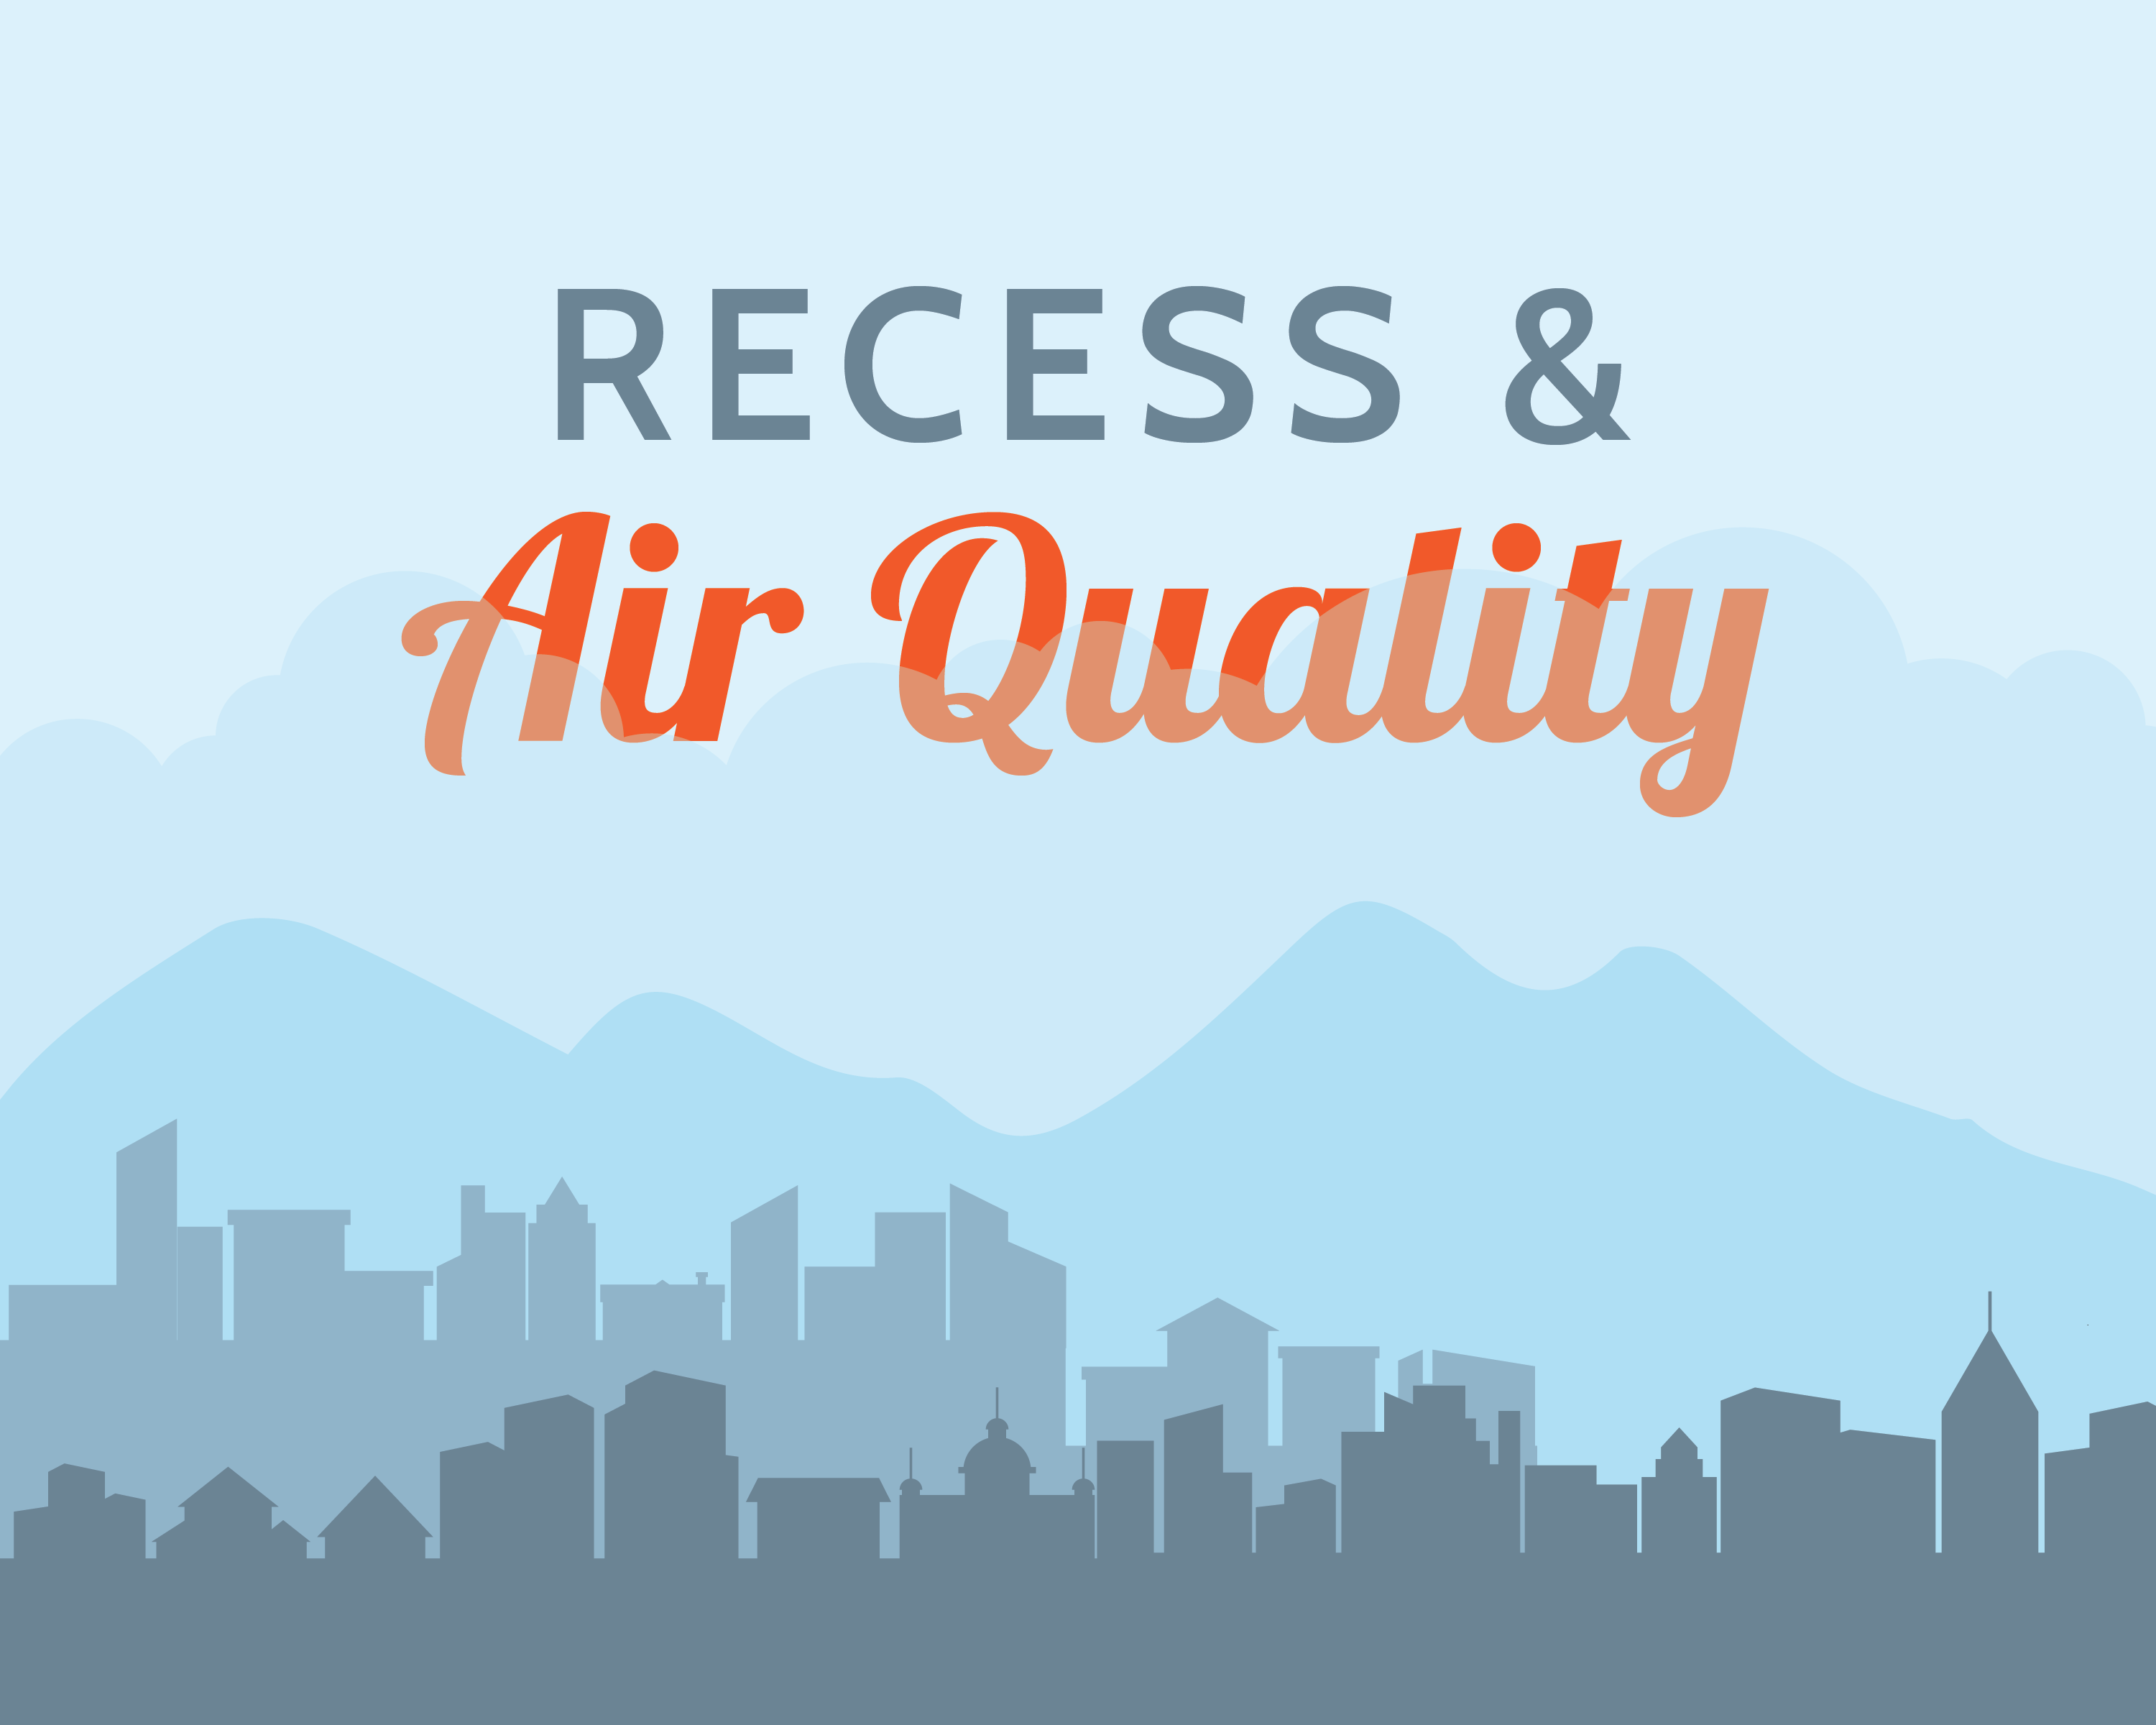 Recess and air quality